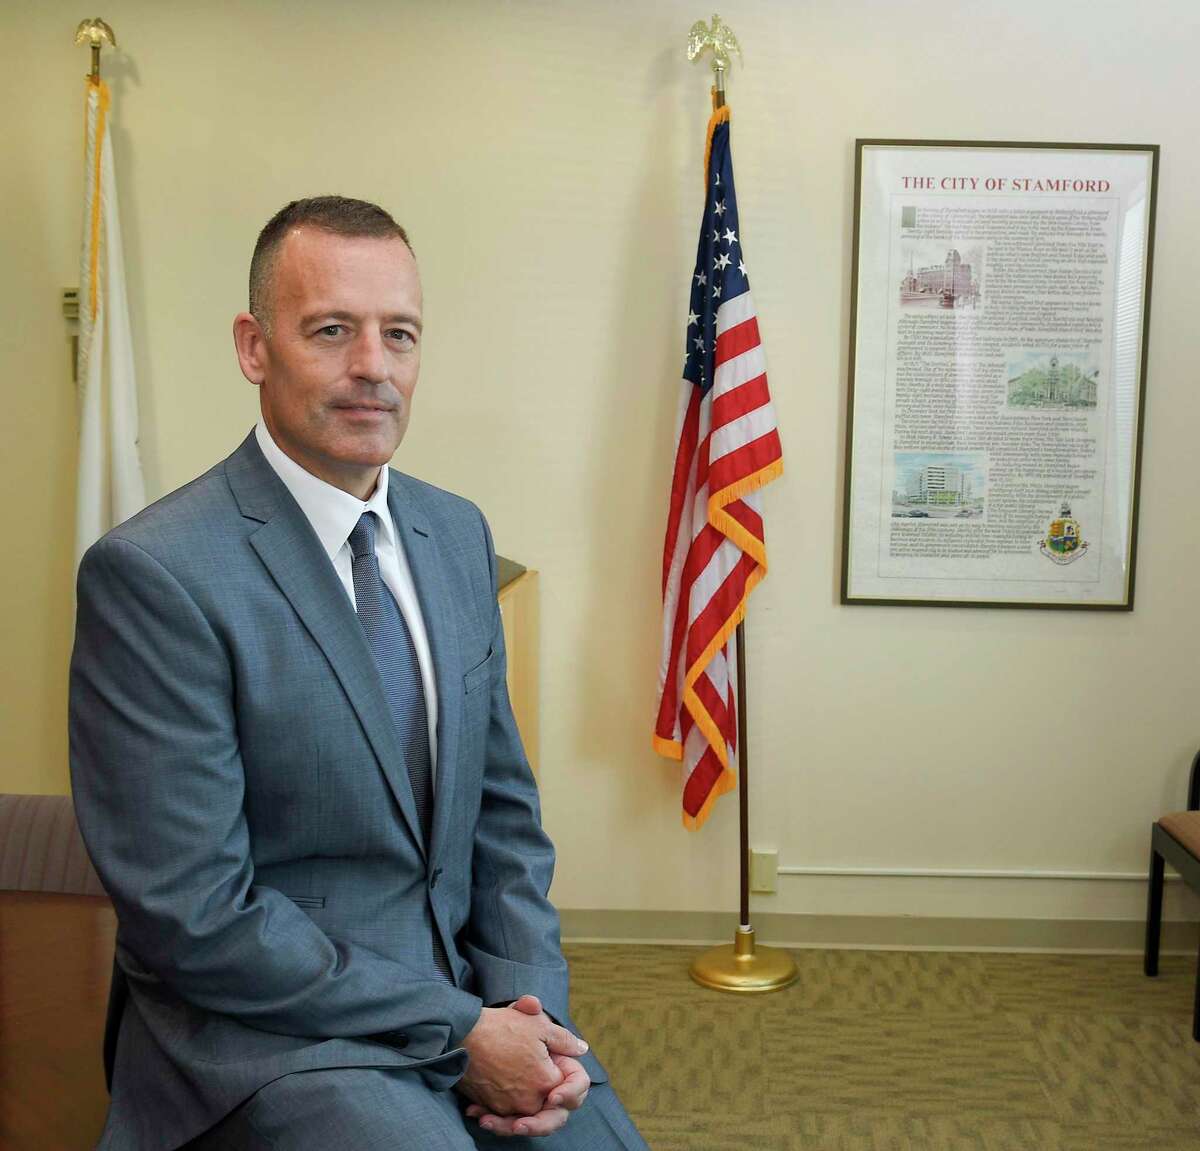 Chris Murtha is photograph on June 12, 2019 in Stamford, Connecticut. Mayor David Martin named Murtha, as the new police chief to replace the retiring Jon Fontneau. Murtha, 53, has been deputy chief of Maryland's Prince George's County, where he has served for the last 20 years. He will become Stamford's 16th police chief.